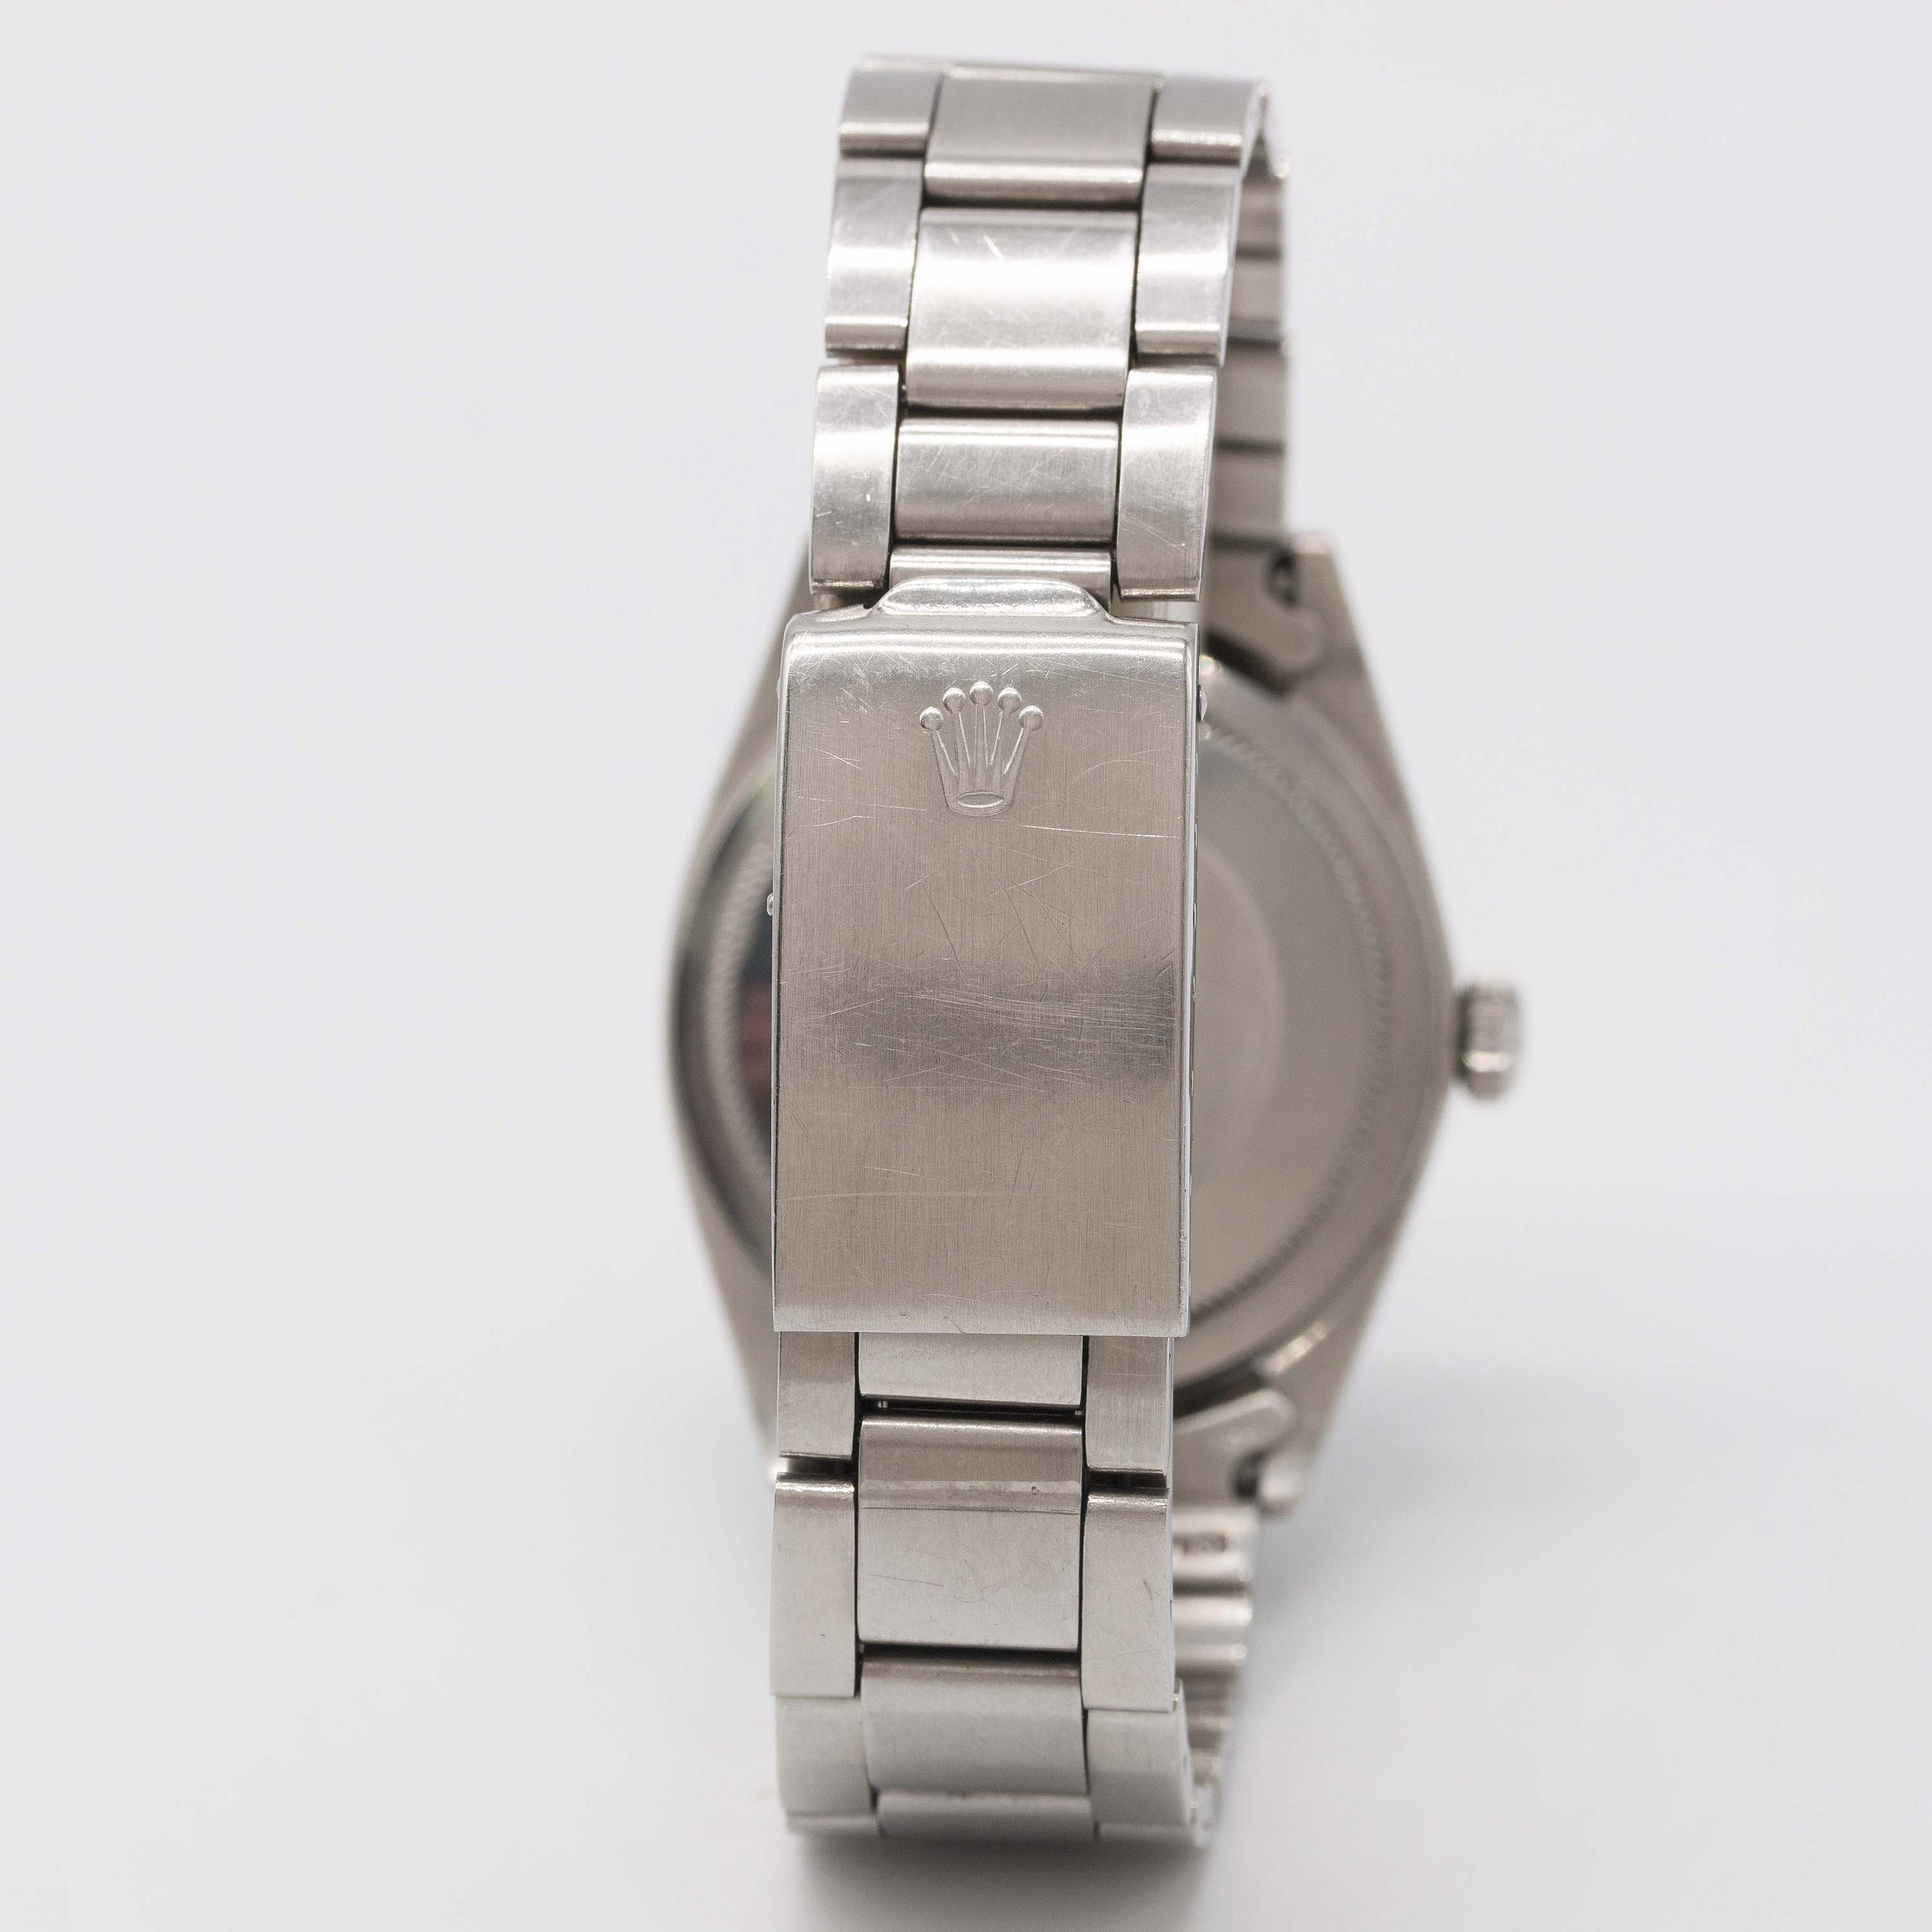 A RARE GENTLEMAN'S STAINLESS STEEL ROLEX OYSTER PERPETUAL EXPLORER BRACELET WATCH CIRCA 1972, REF. - Image 8 of 13